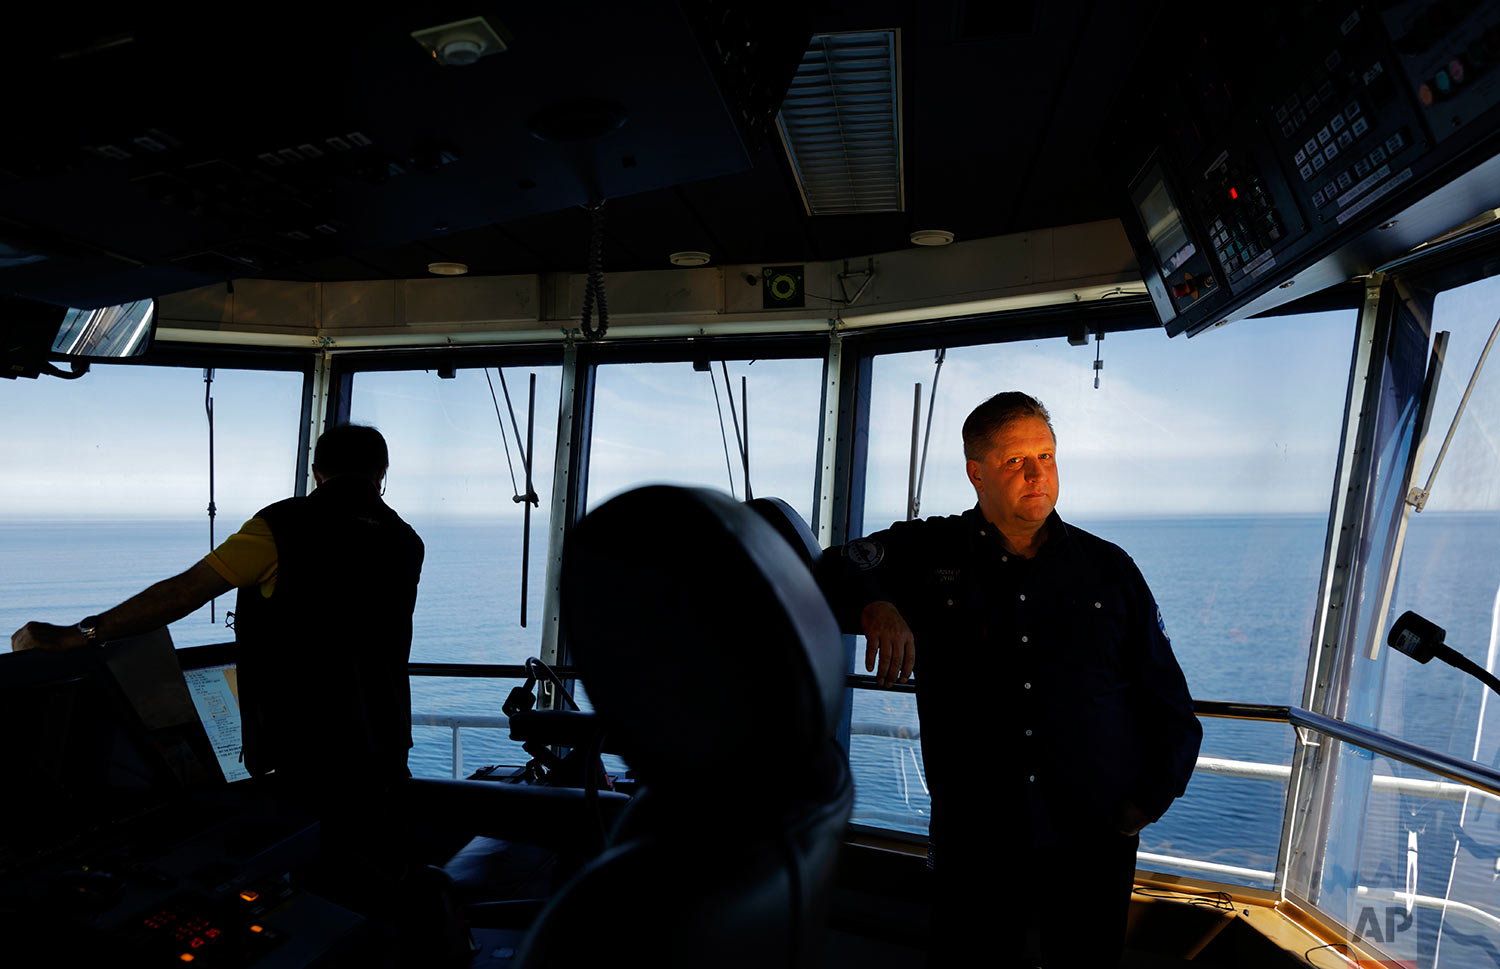  Master Mariner Jyri Viljanen, 56, captain of the Finnish icebreaker MSV Nordica stands for a portrait in the ship's bridge as it sails north in the Bering Sea toward the Arctic, Thursday, July 13, 2017.  Viljanen has been going to sea for 39 years a